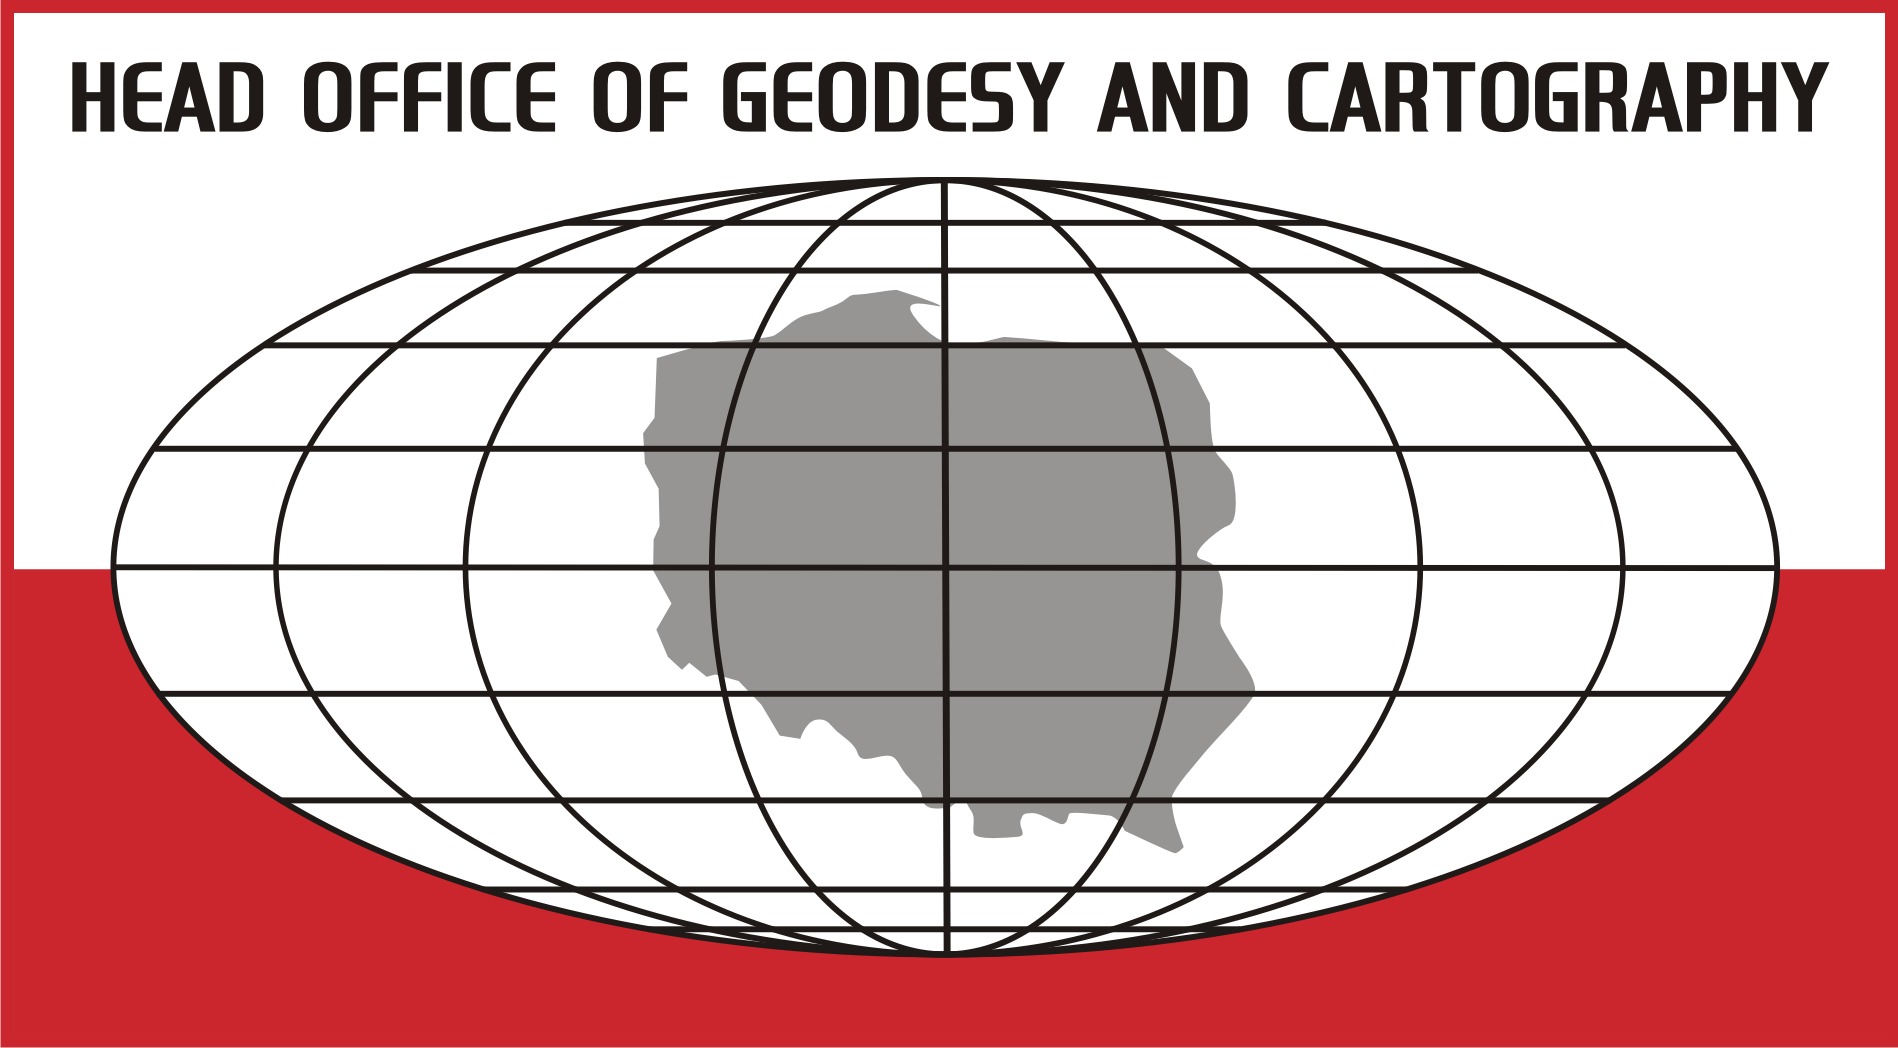 The logo of the Central Office of Geodesy and Cartography showing the Earth's cartographic grid and the gray outline of Poland against the background of the Polish flag.